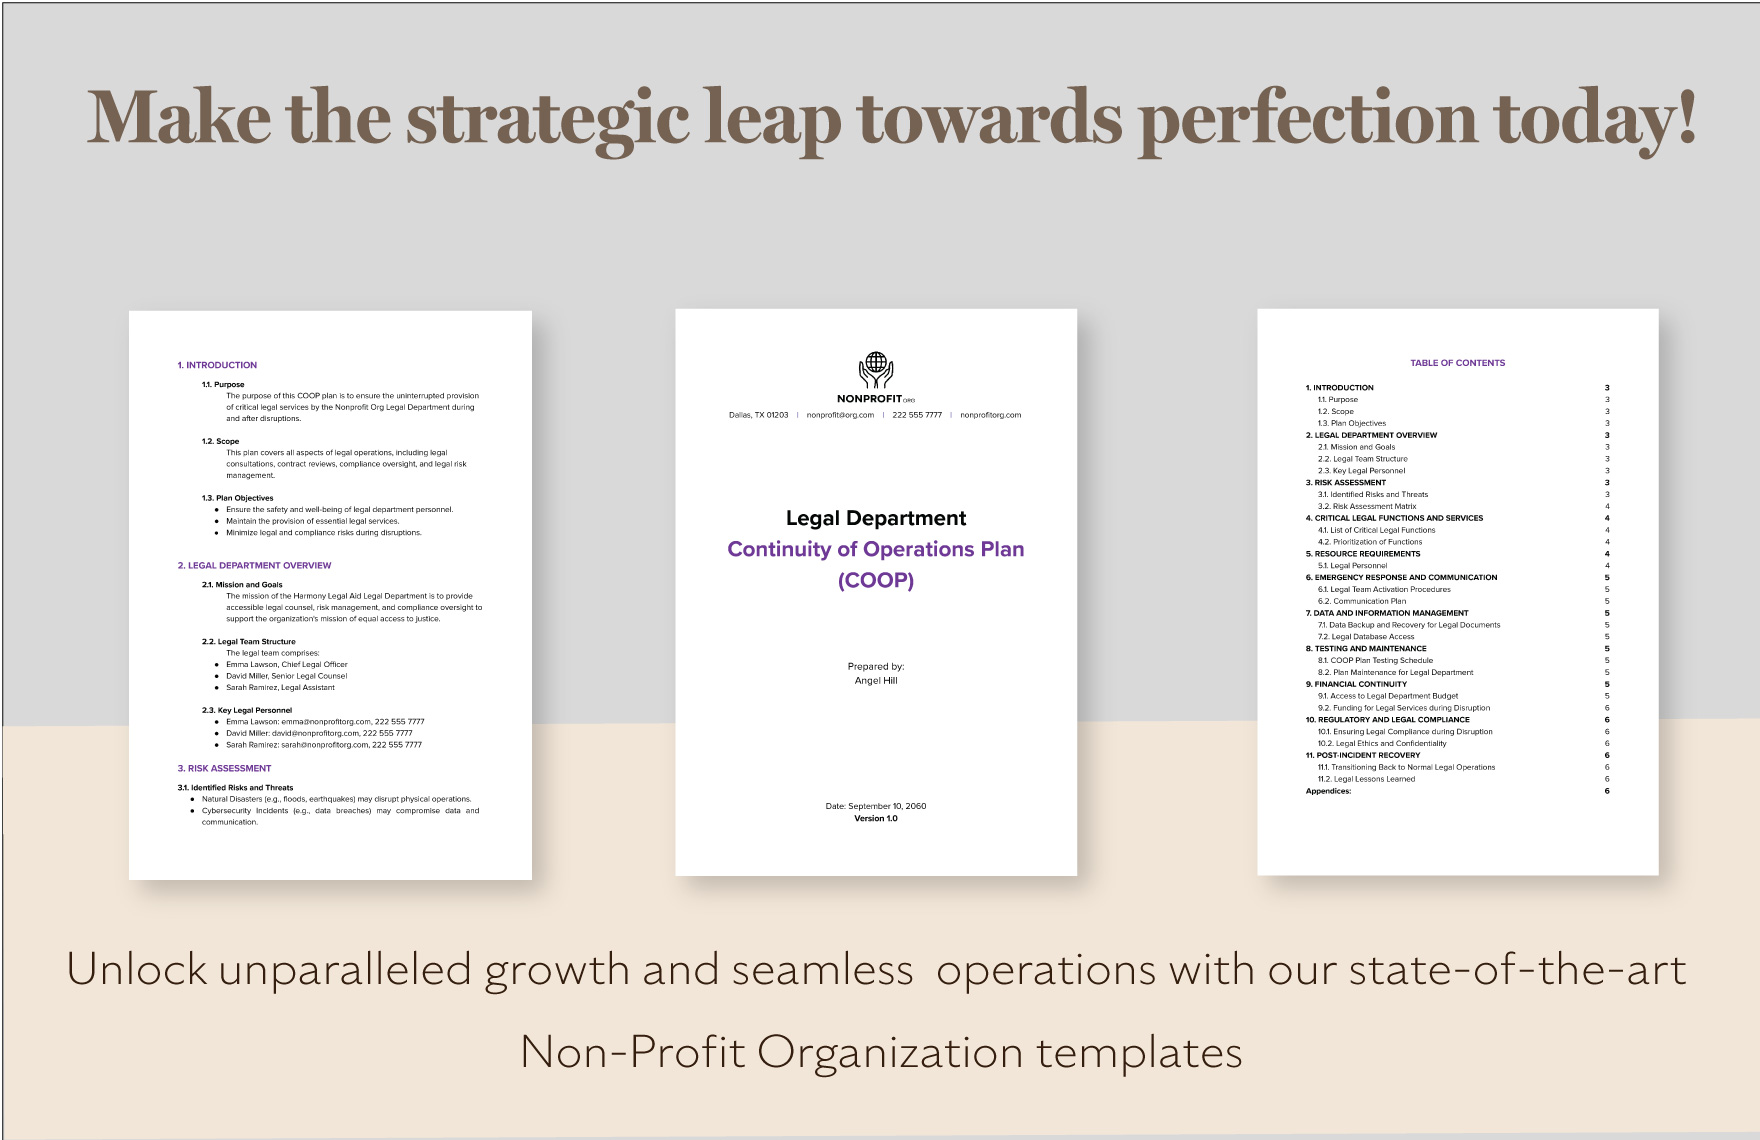 Nonprofit Organization Continuity of Operations Plan Template